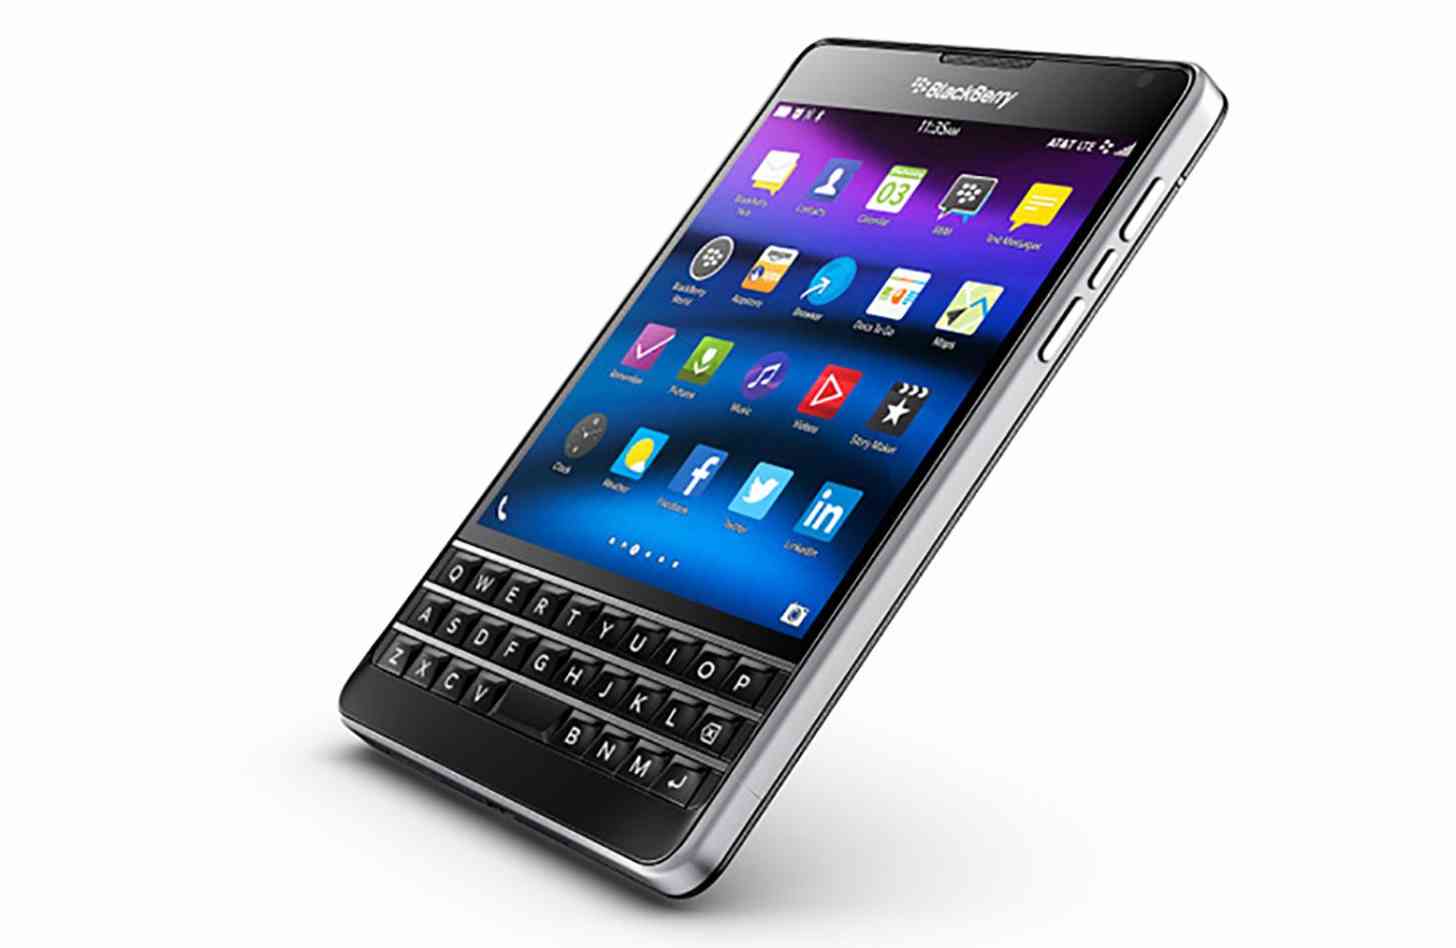 AT&T BlackBerry Passport rounded corners